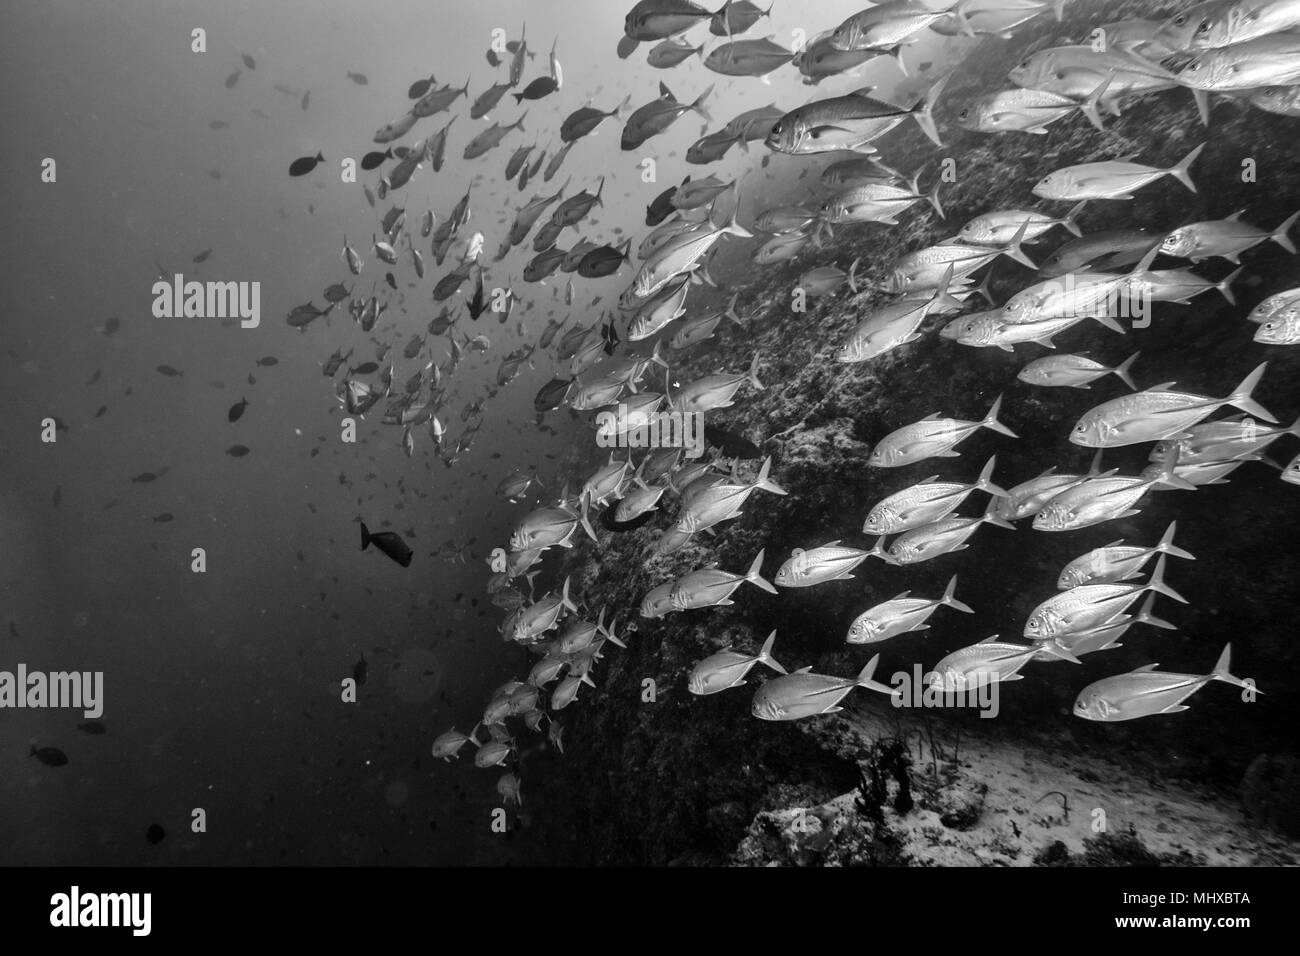 Inside a giant travelly tuna school of fish close up in b&w Stock Photo